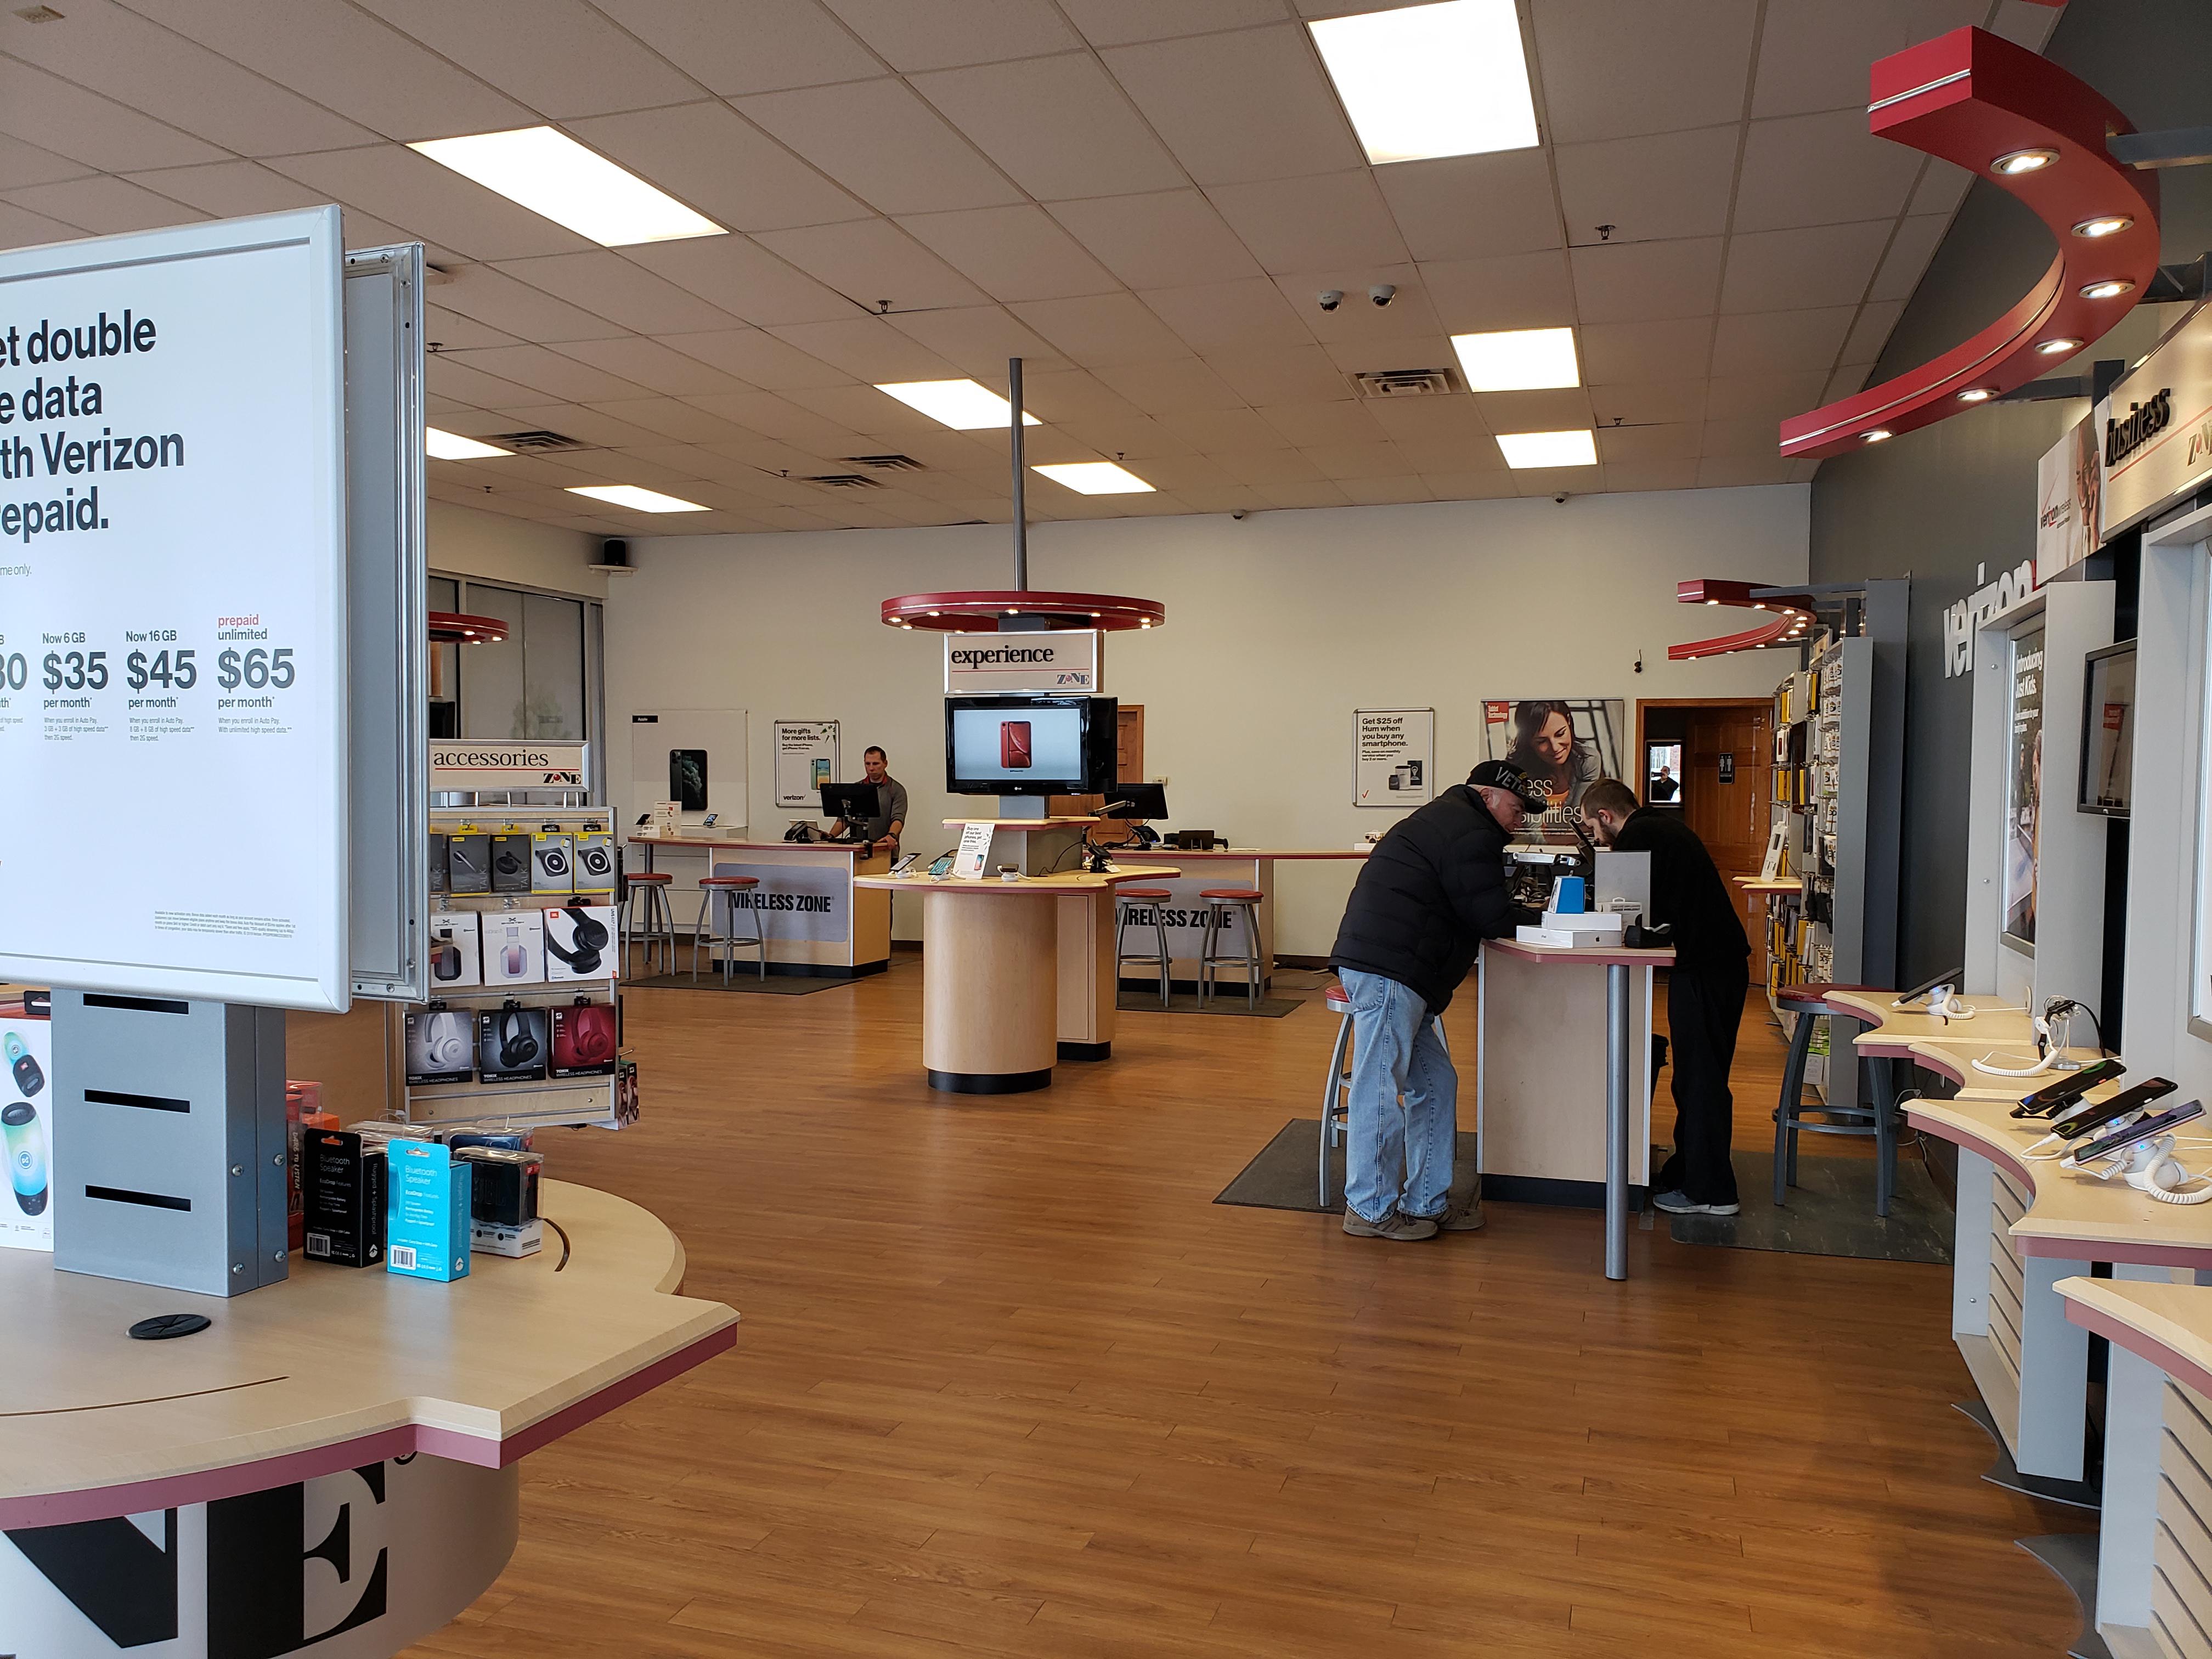 Come check out Wireless Zone® of Springville's new look!